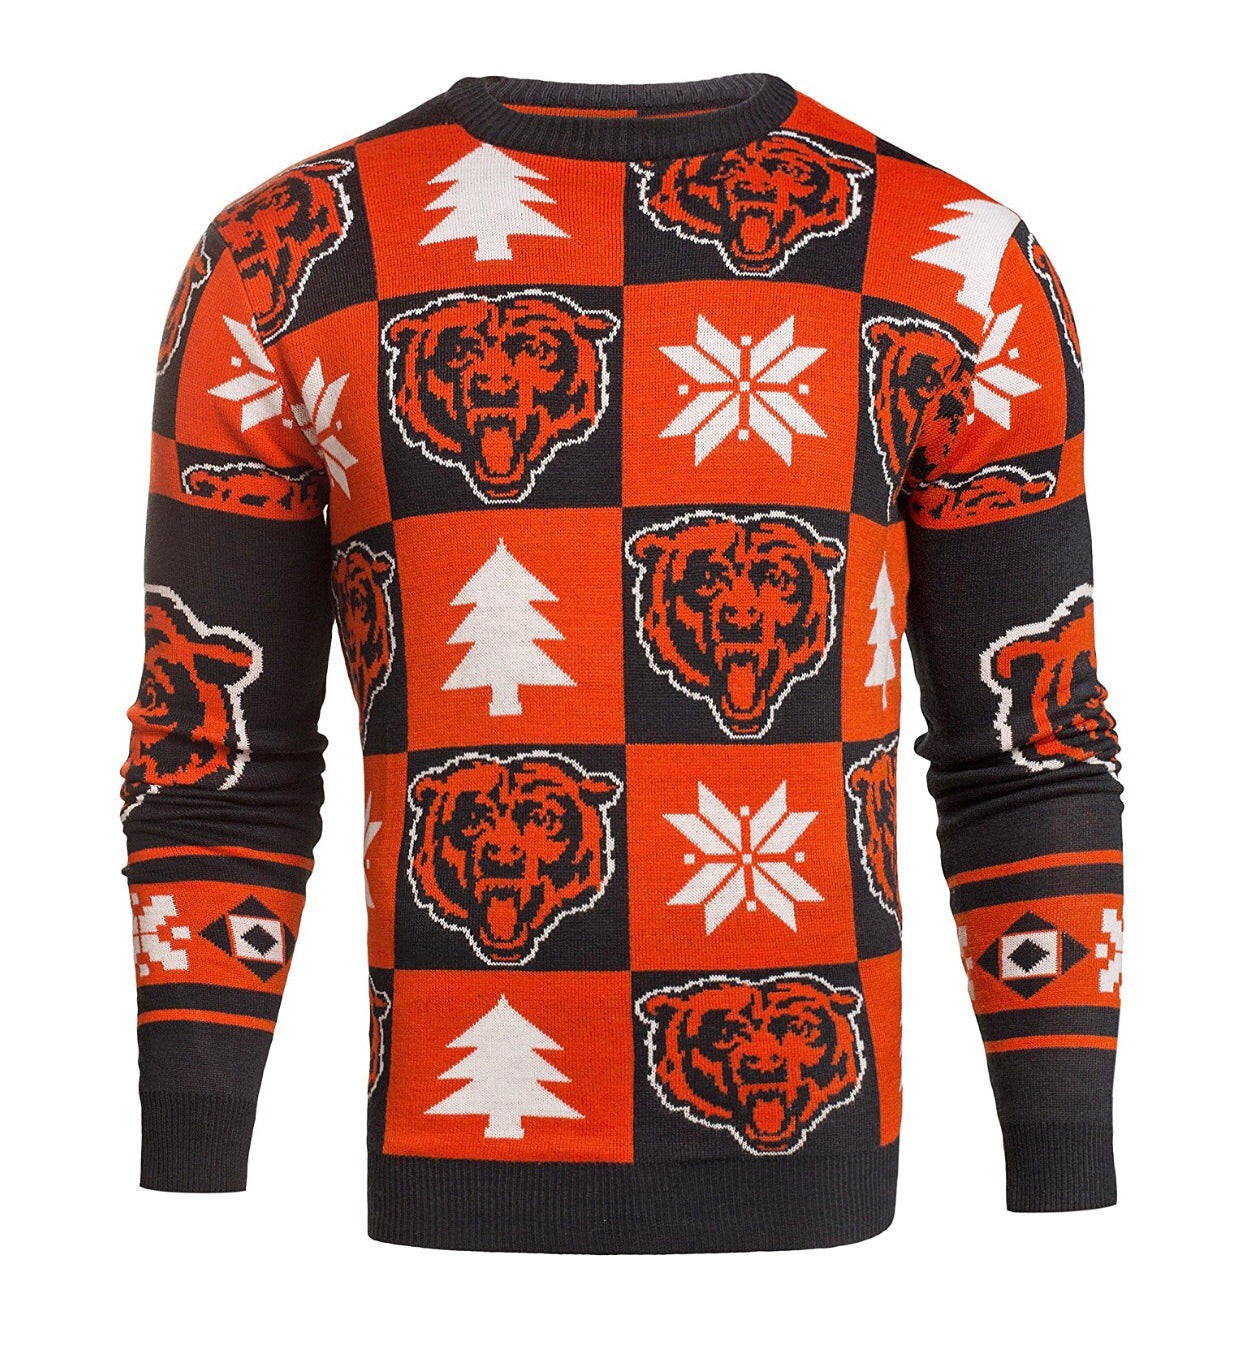 Da Coach Edition Chicago Bears Ugly Sweater – Ugly Christmas Sweater Party